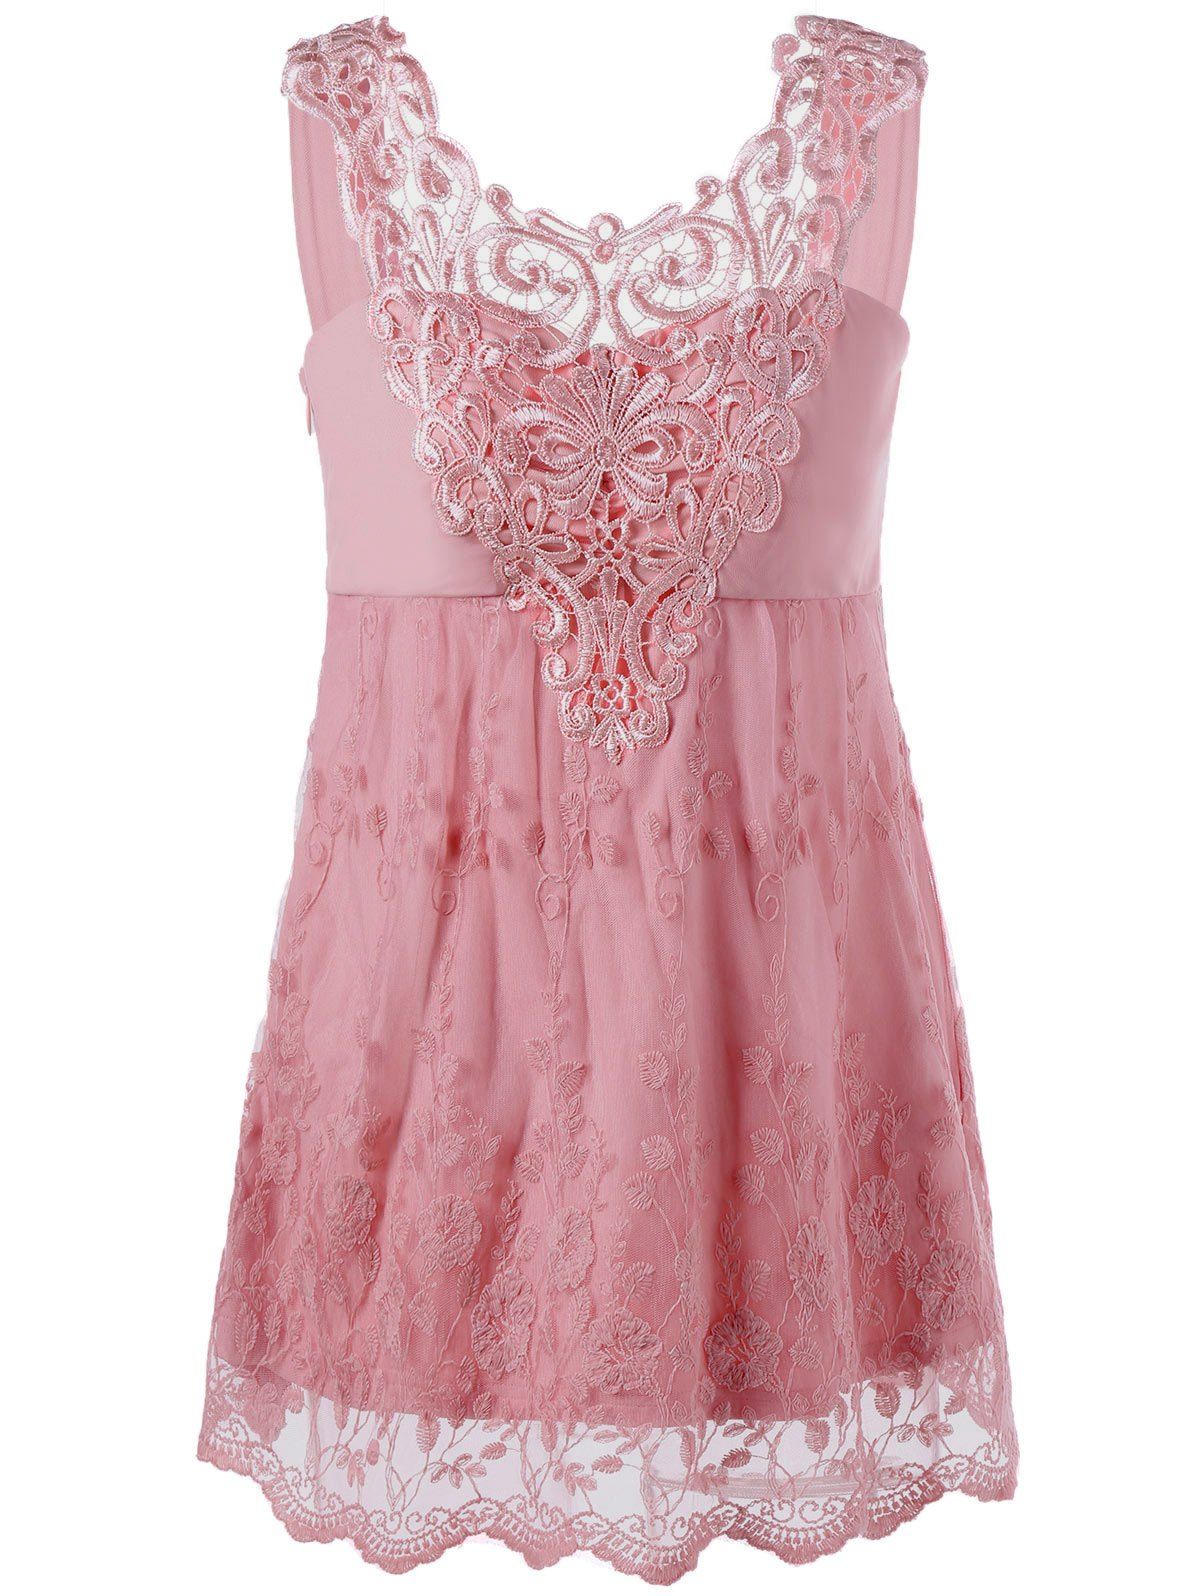 [17% OFF] 2021 Lace Trim Empire Waist Scalloped Tank Top In PINK ...